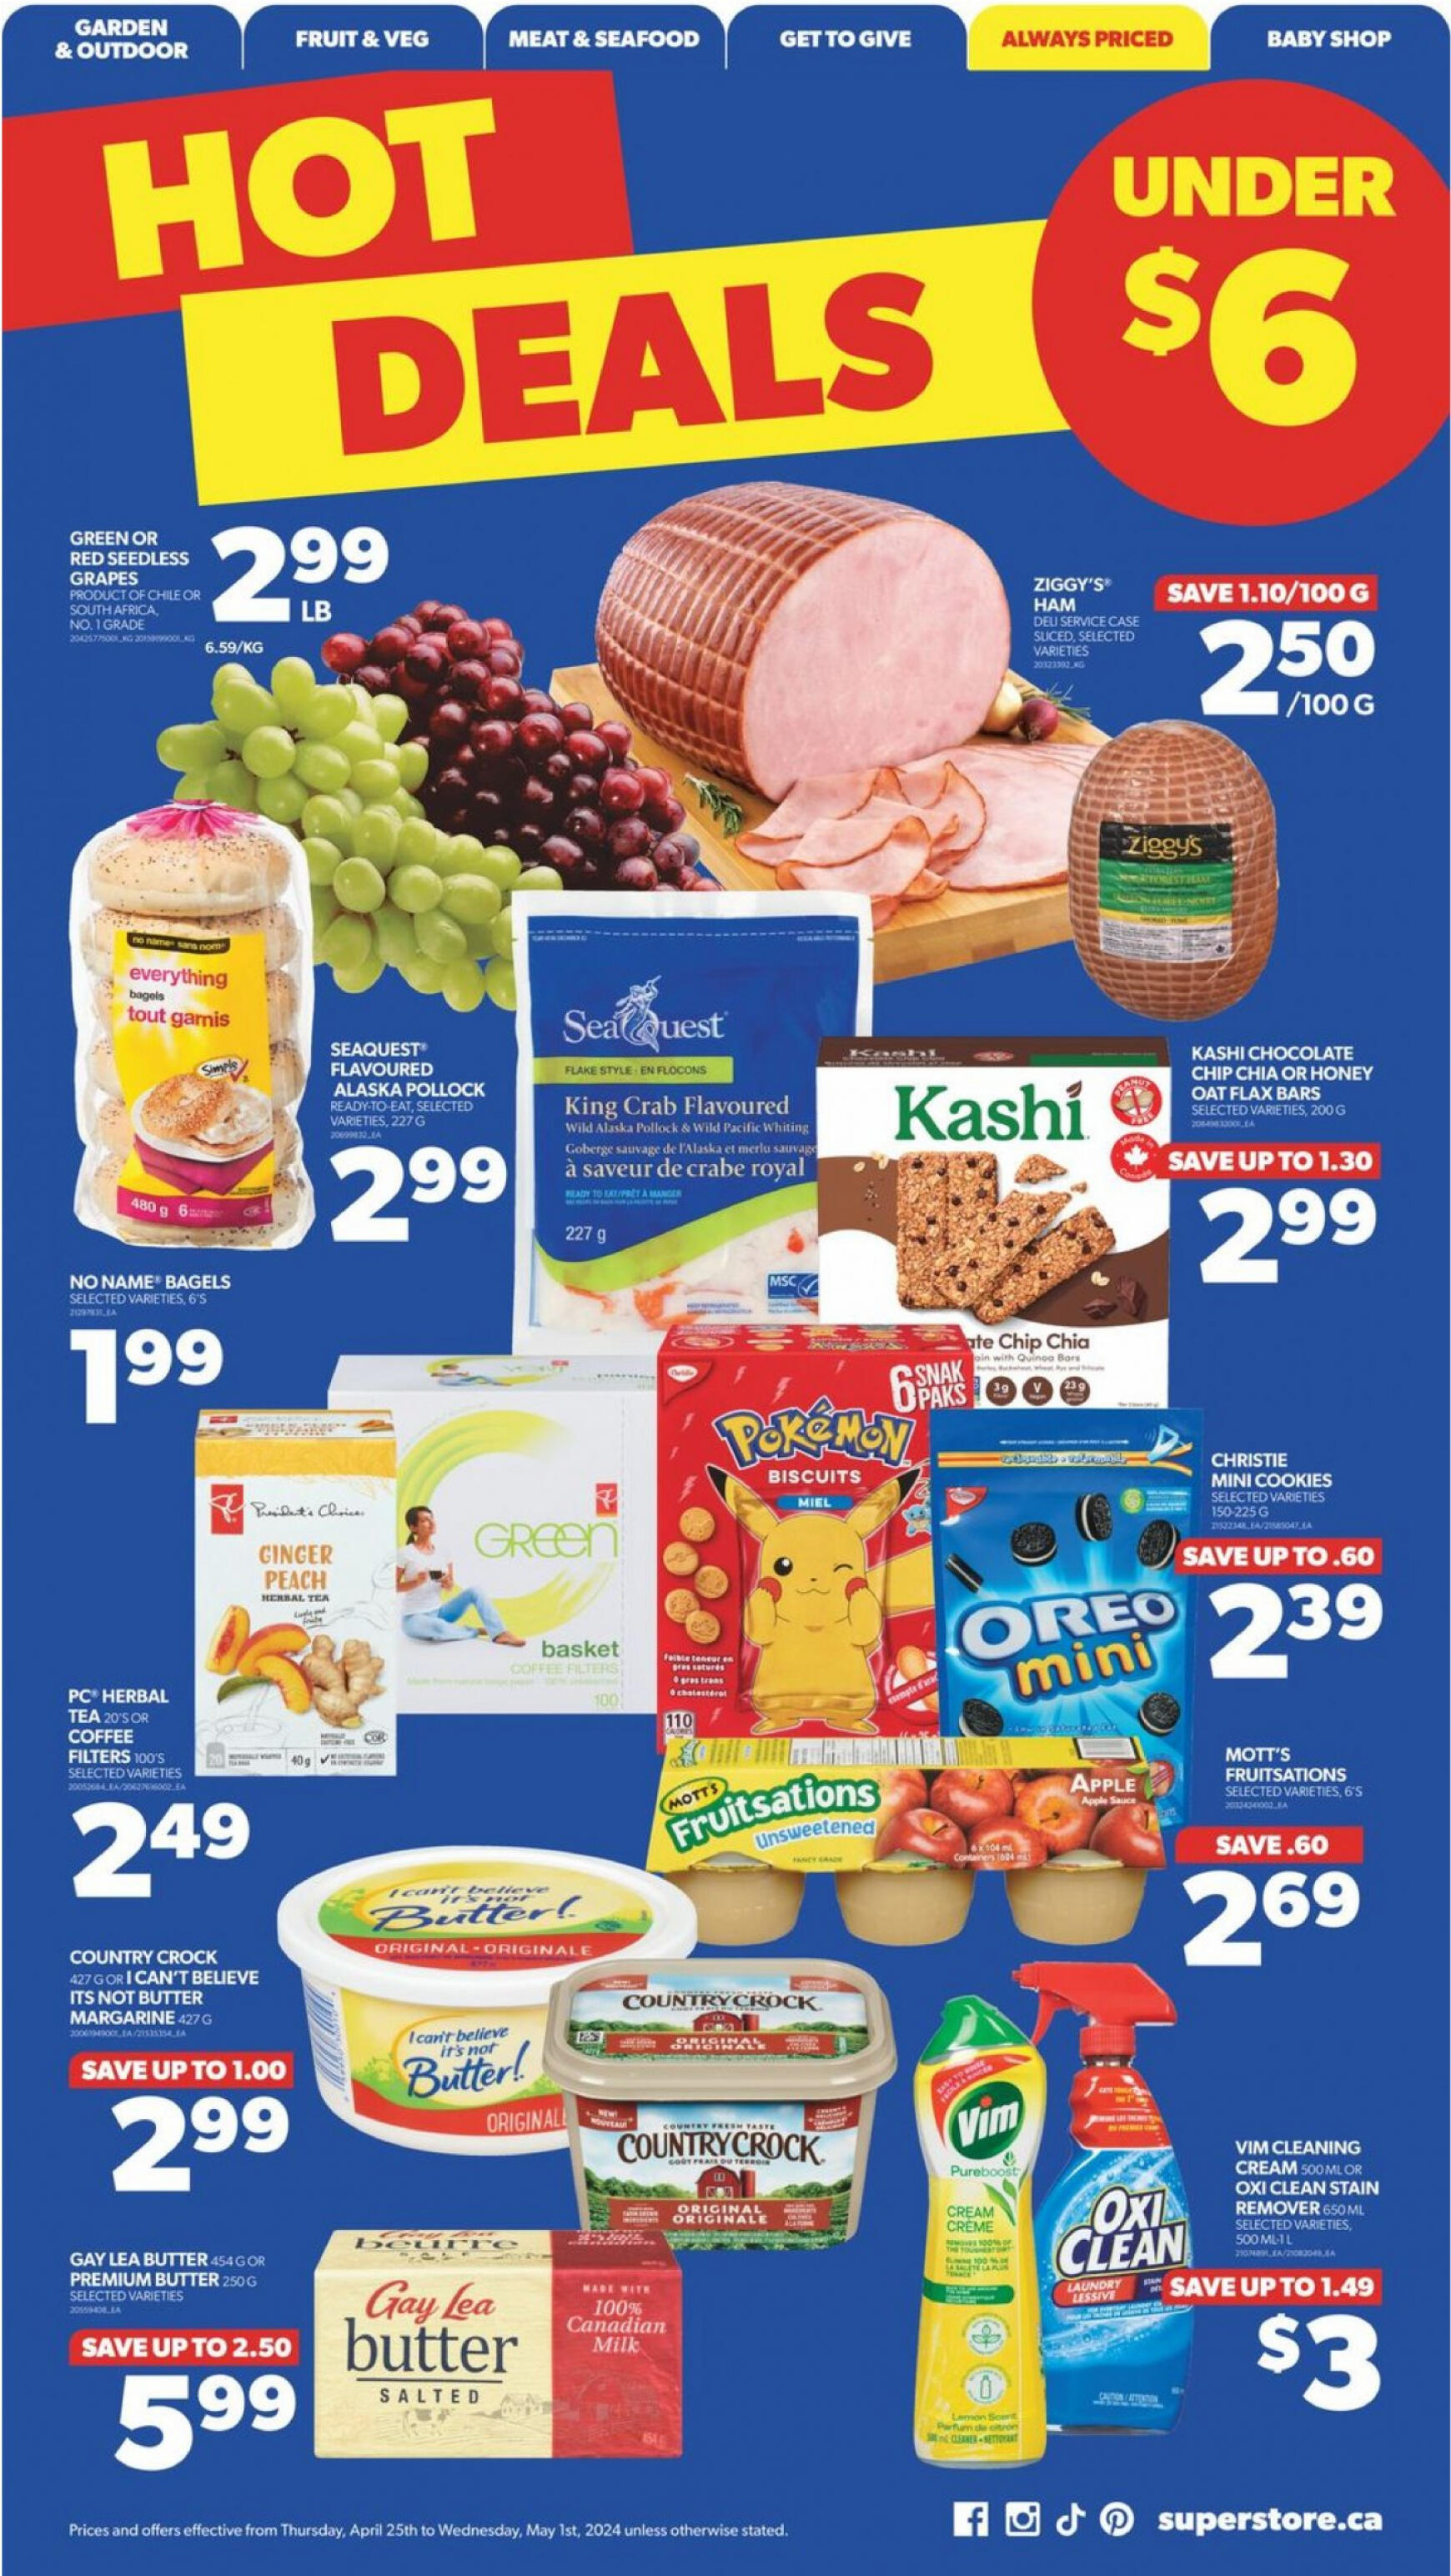 real-canadian-superstore - Real Canadian Superstore flyer current 01.05. - 31.05. - page: 5